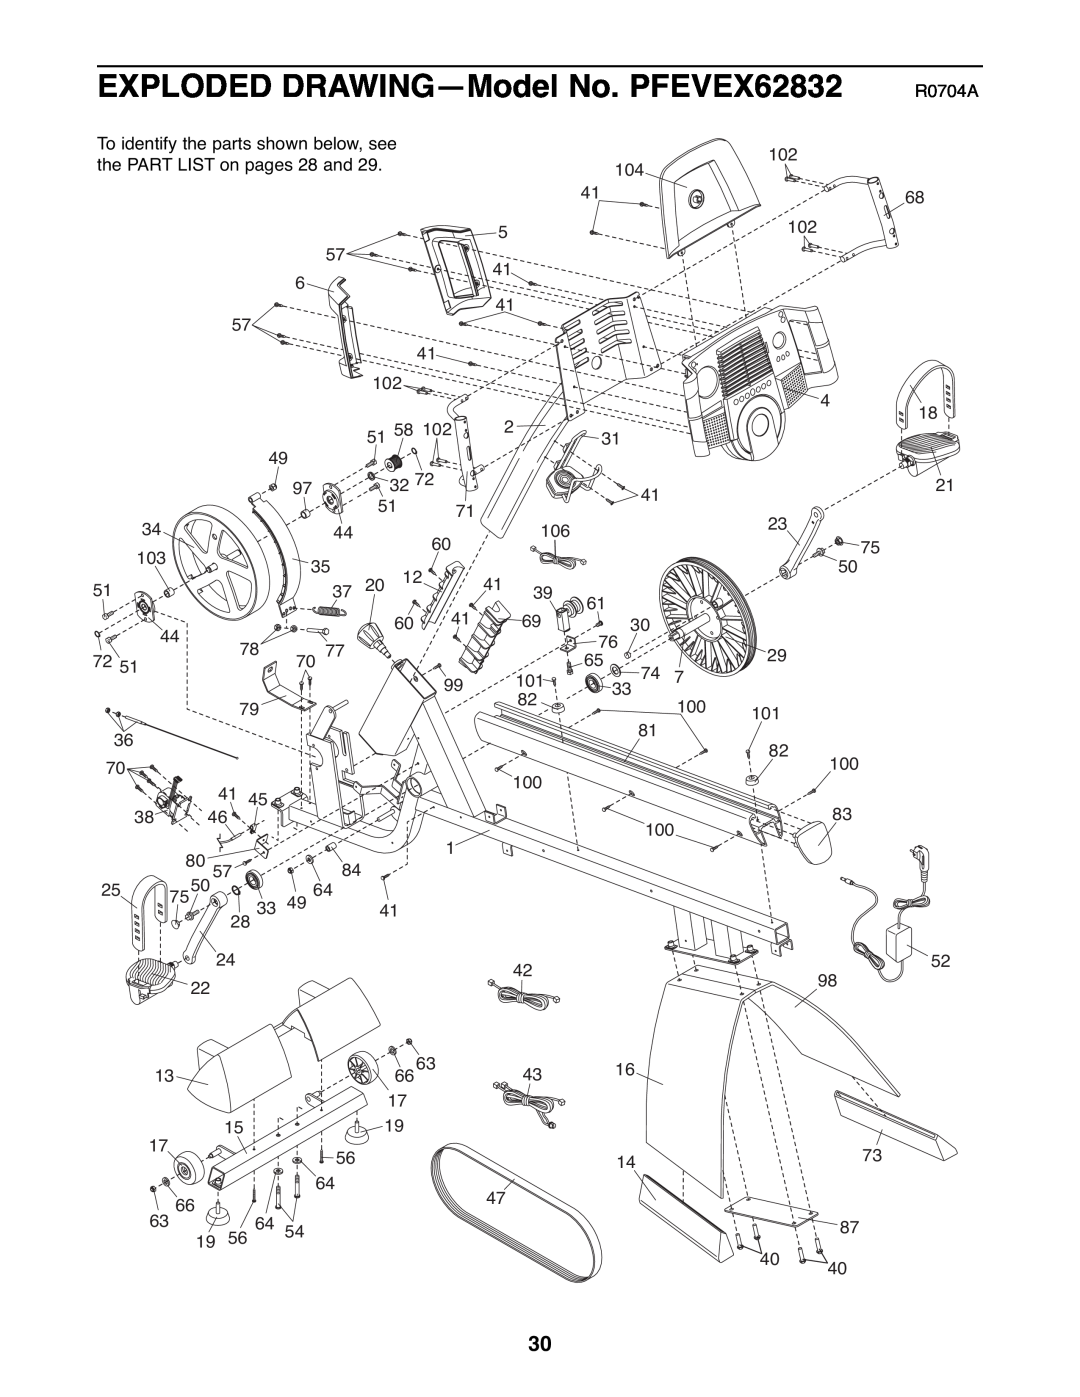 ProForm user manual EXPLODED DRAWING-Model No. PFEVEX62832, R0704A 